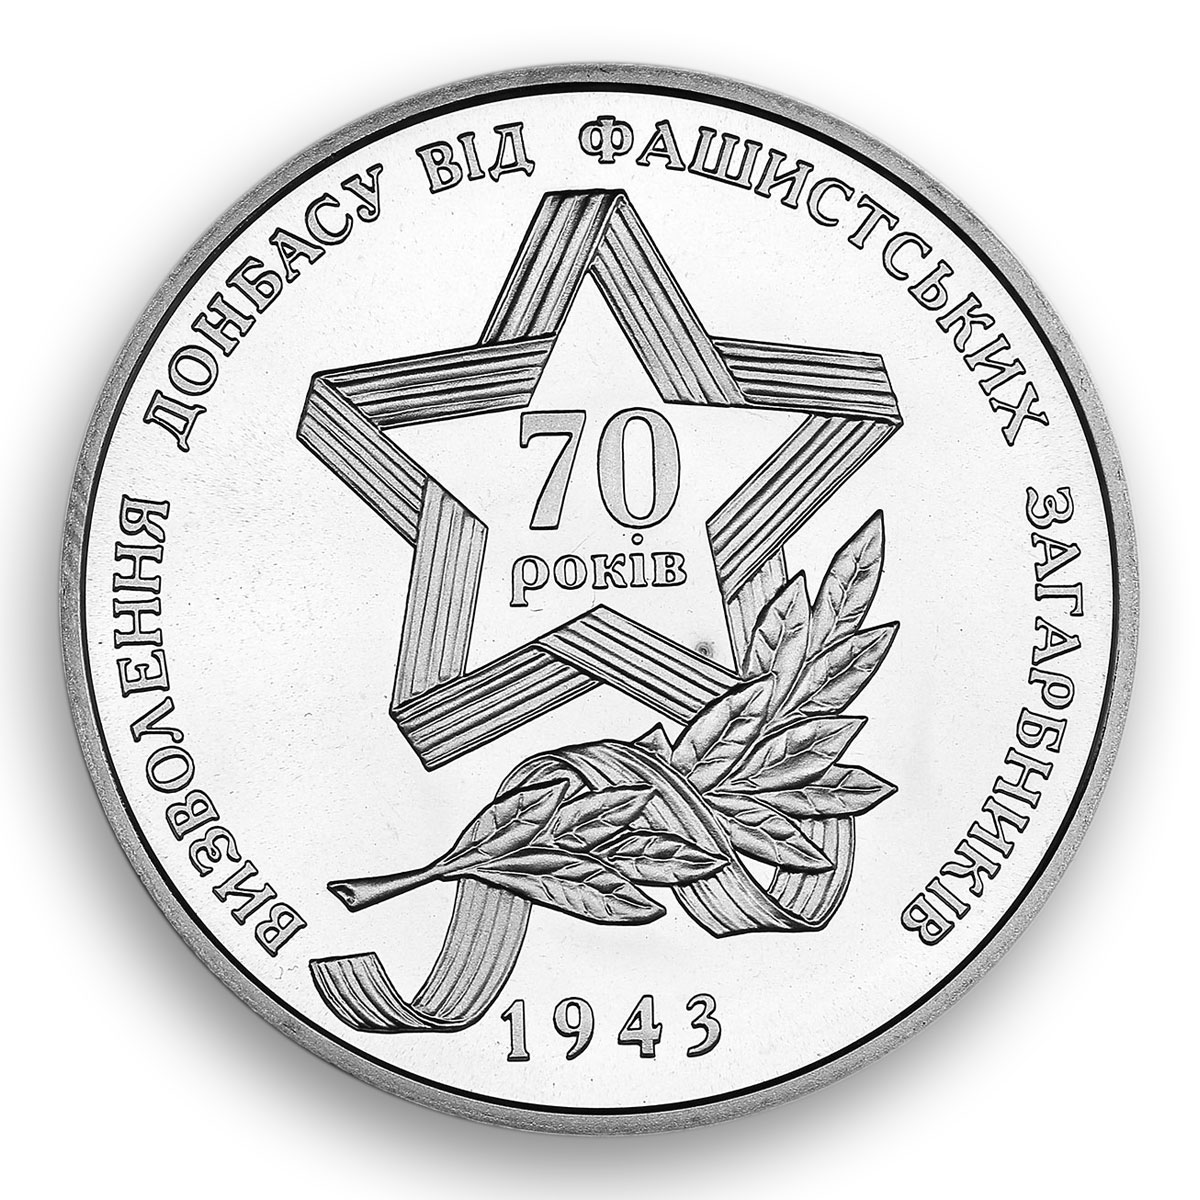 Ukraine 5 hryvnia 70 years Liberation of Donbass from fascists nickel coin 2013